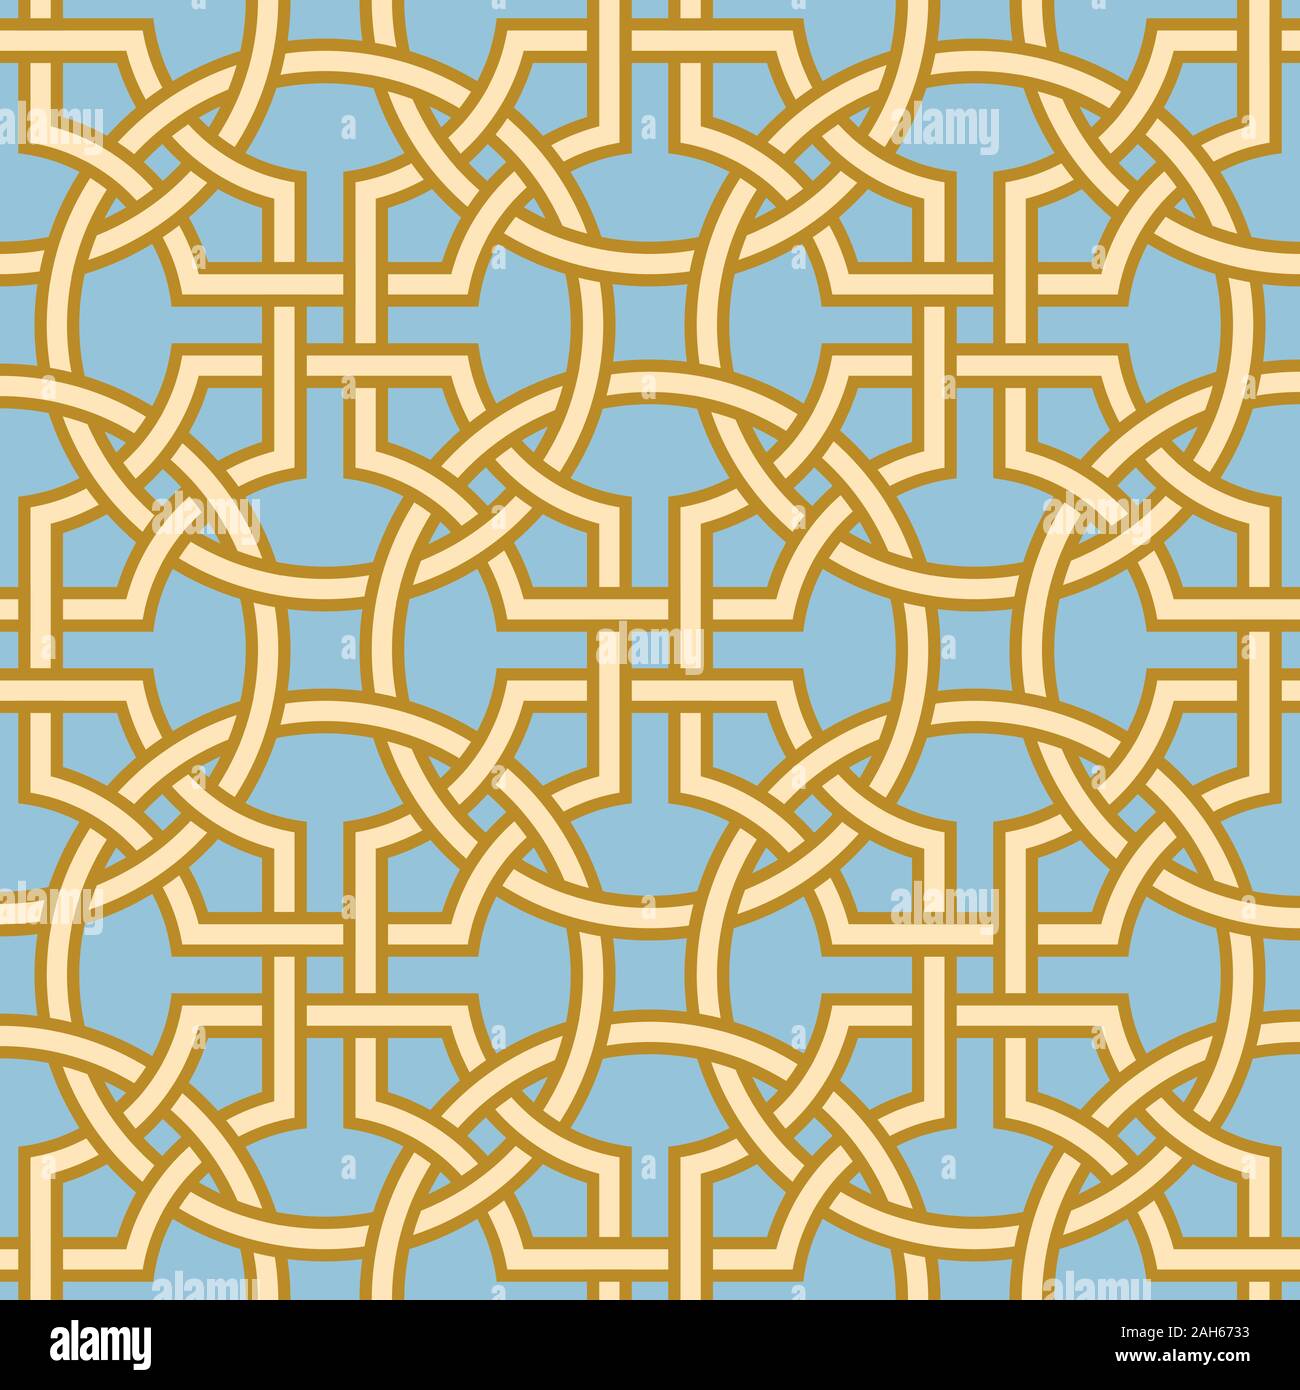 Mettlach or encaustic seamless tiles pattern in celtic knot style. Tileable vector background. Stock Vector